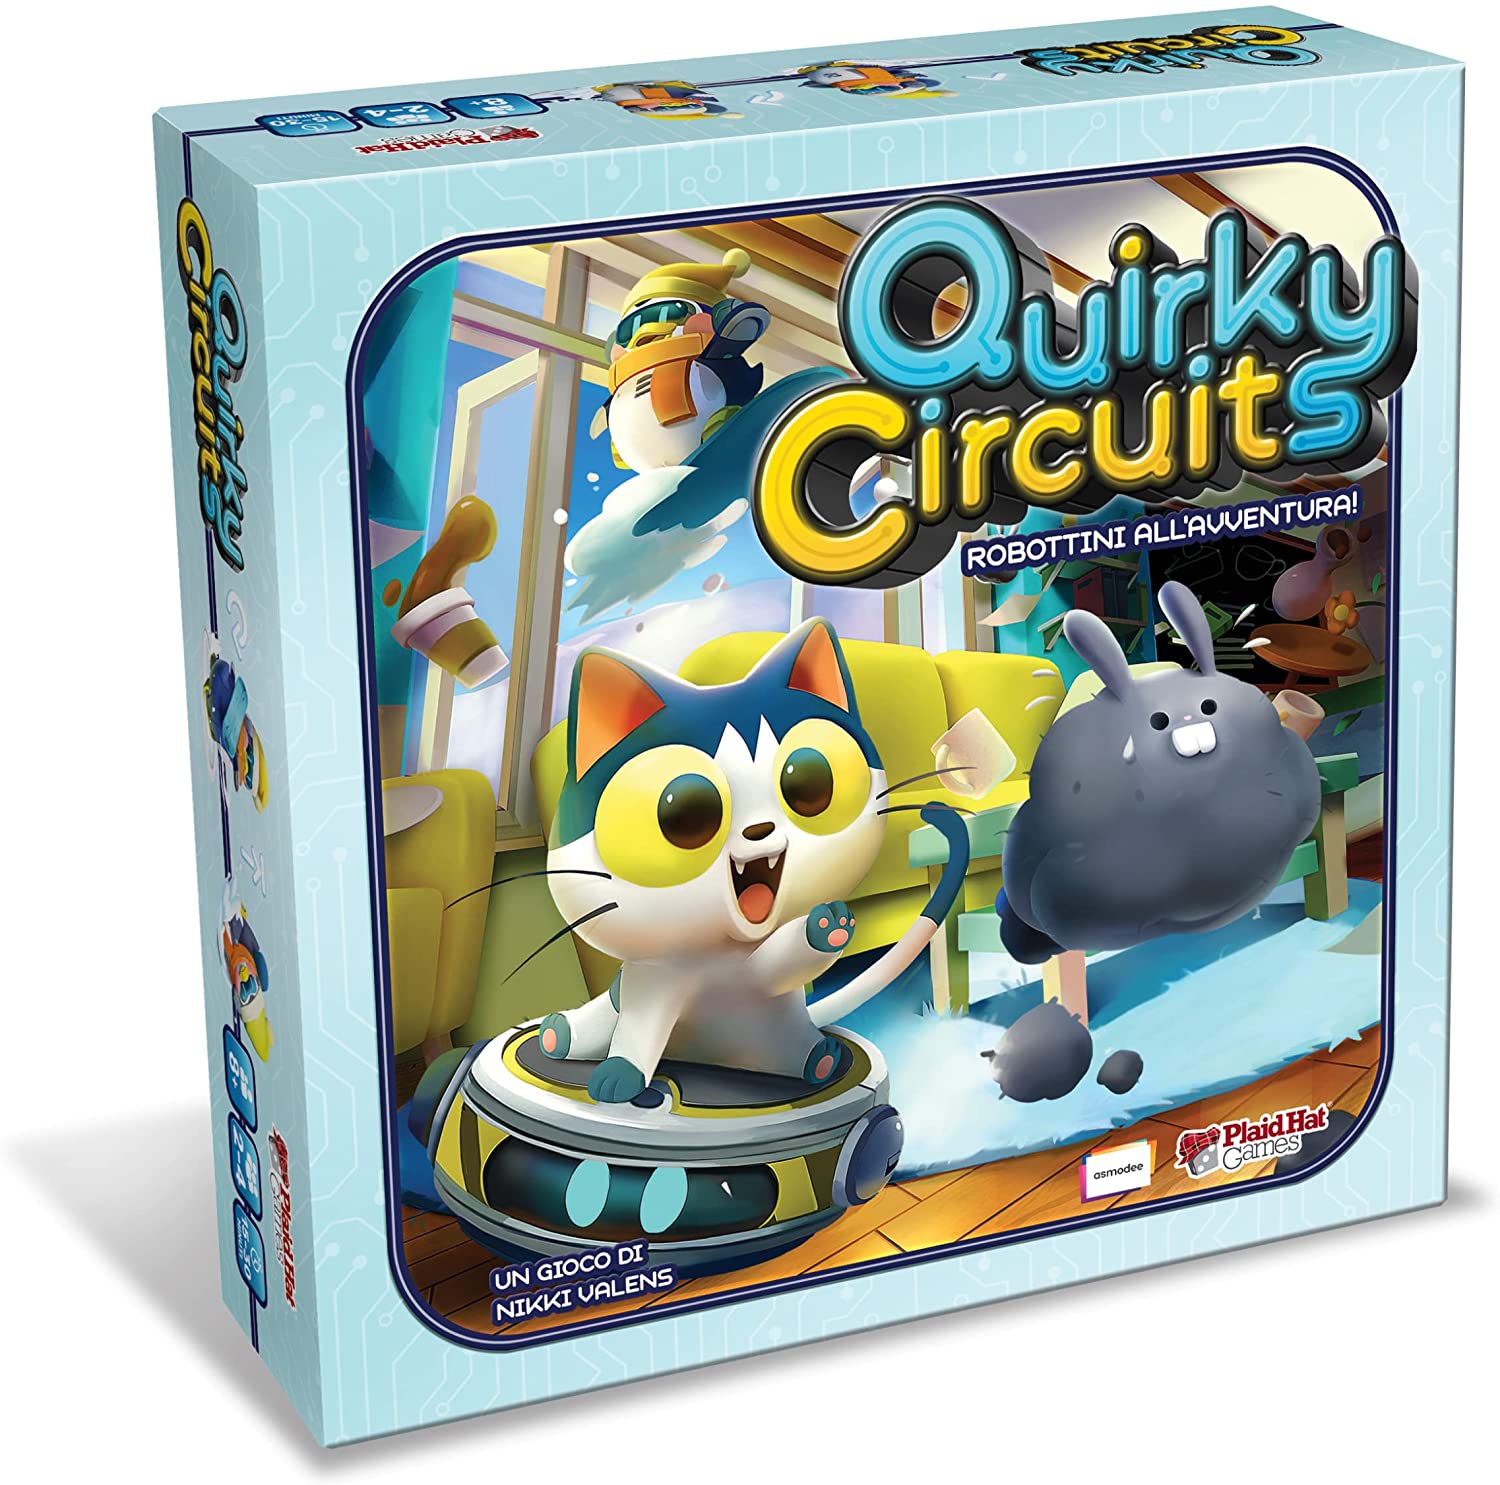 Quirky Circuits